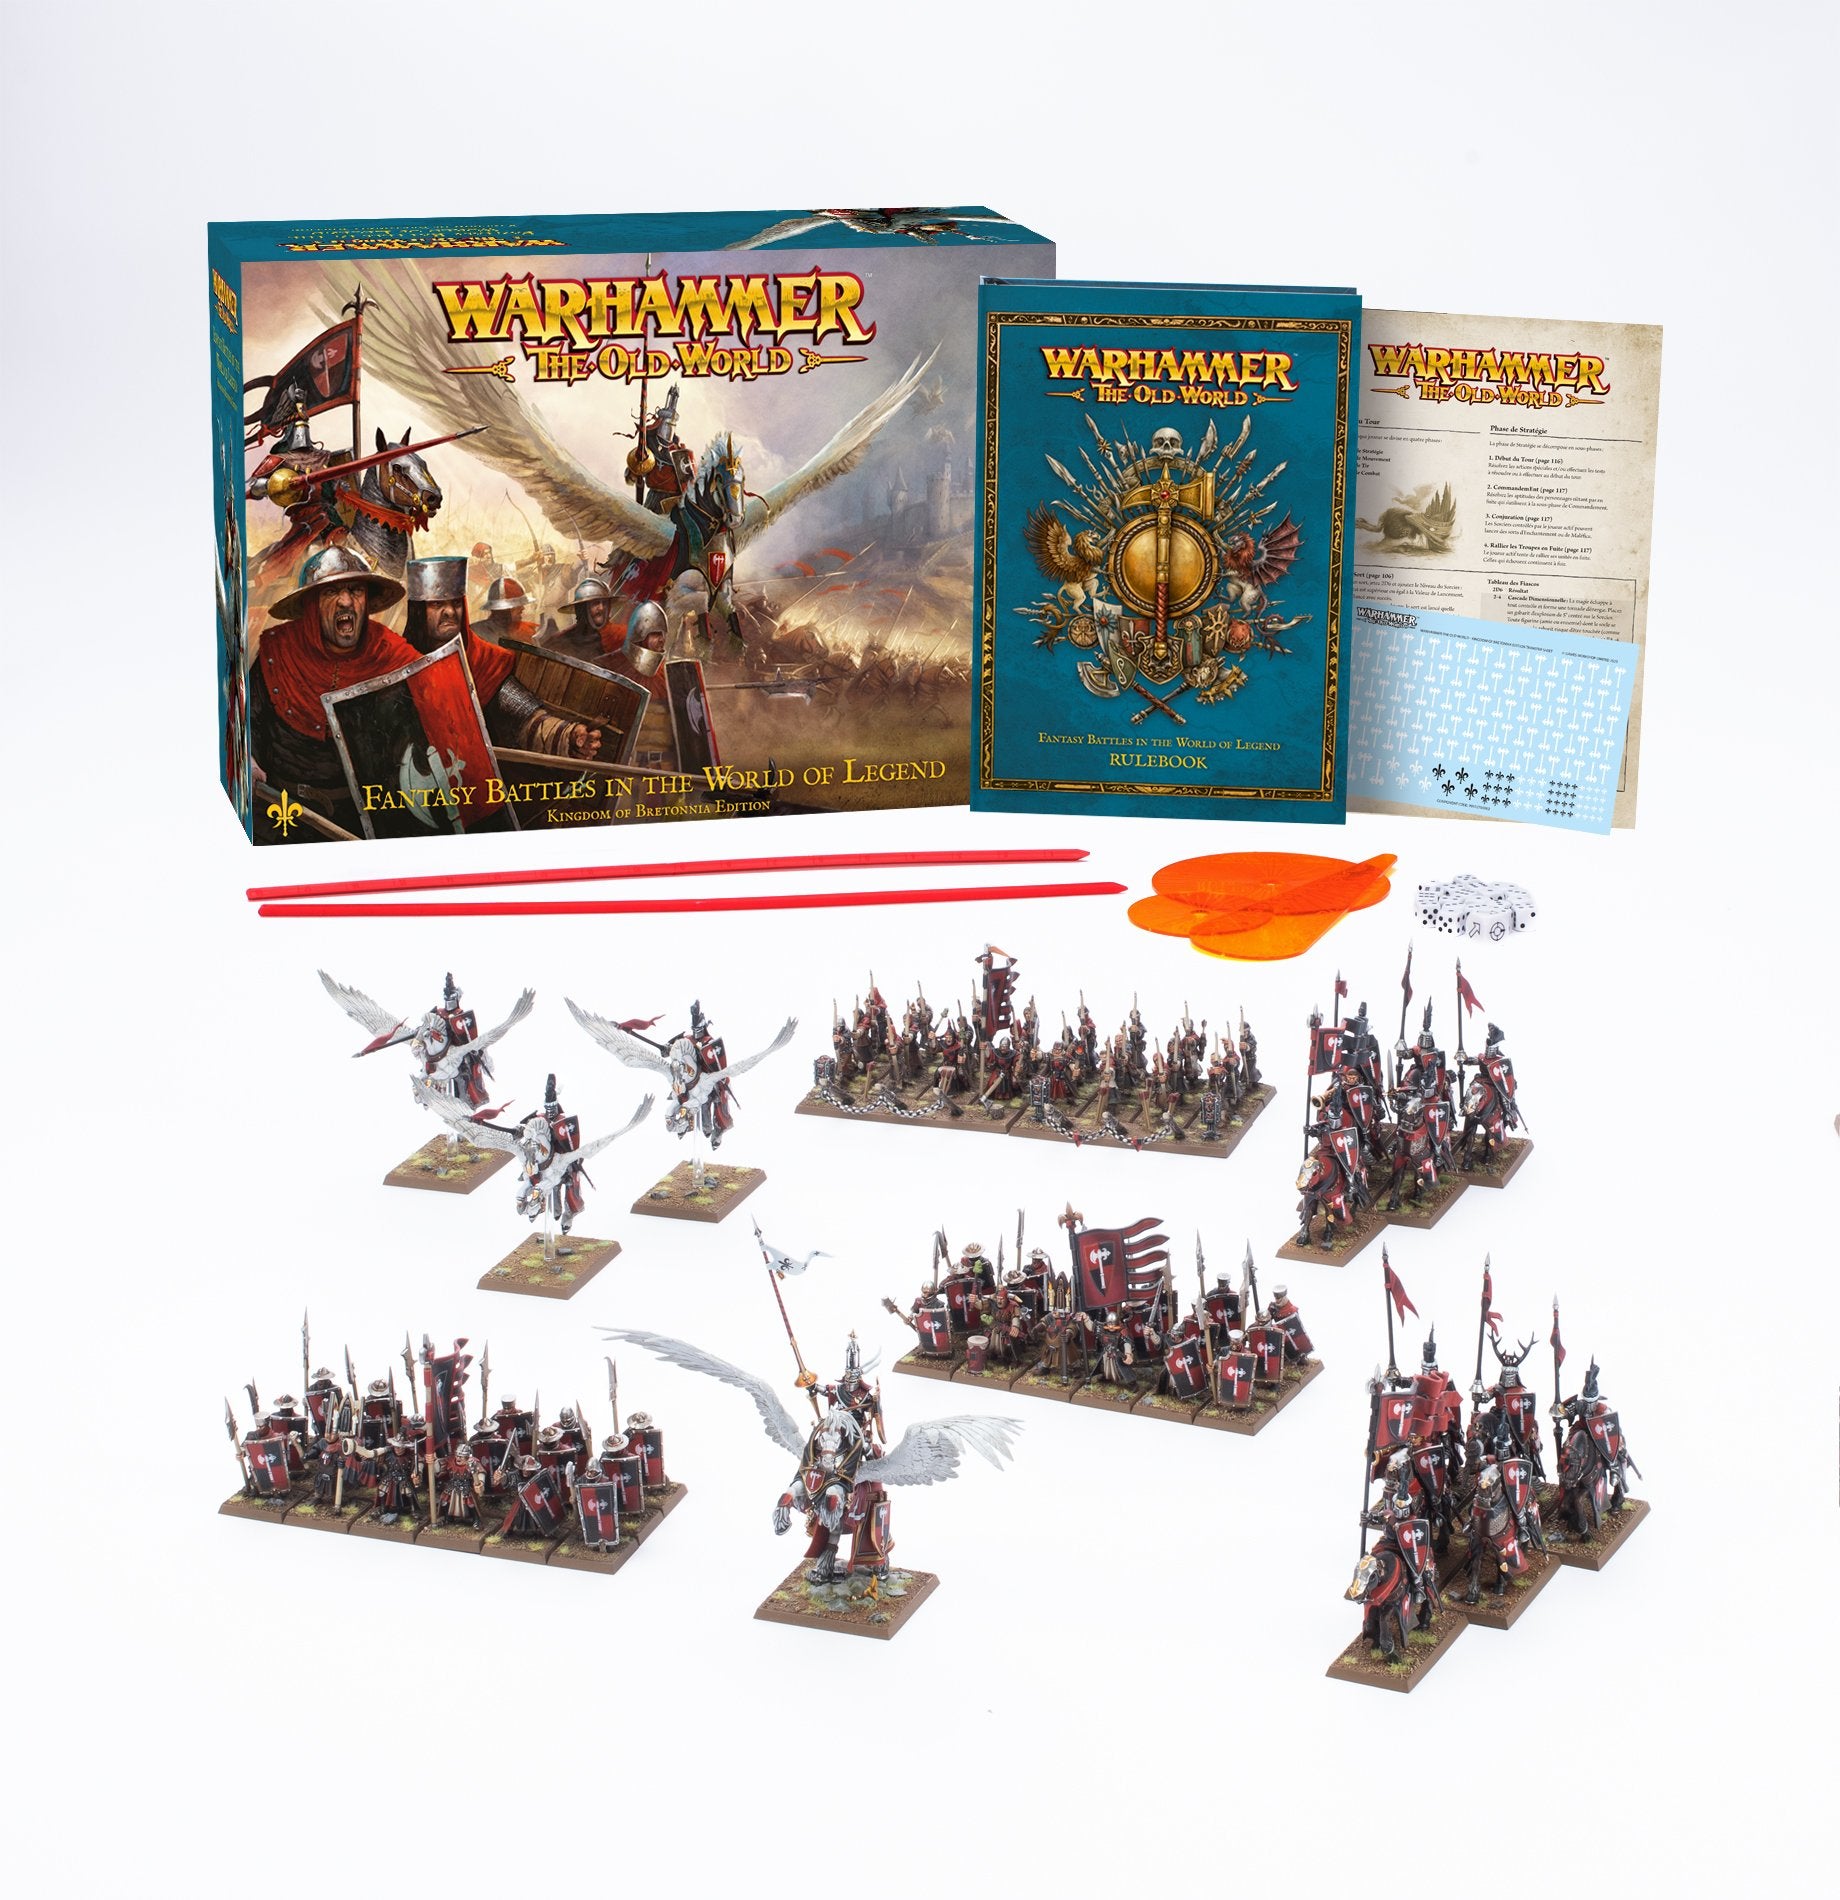 Warhammer Age of Sigmar - Kit d'initiation Guerrier - 18 figurines